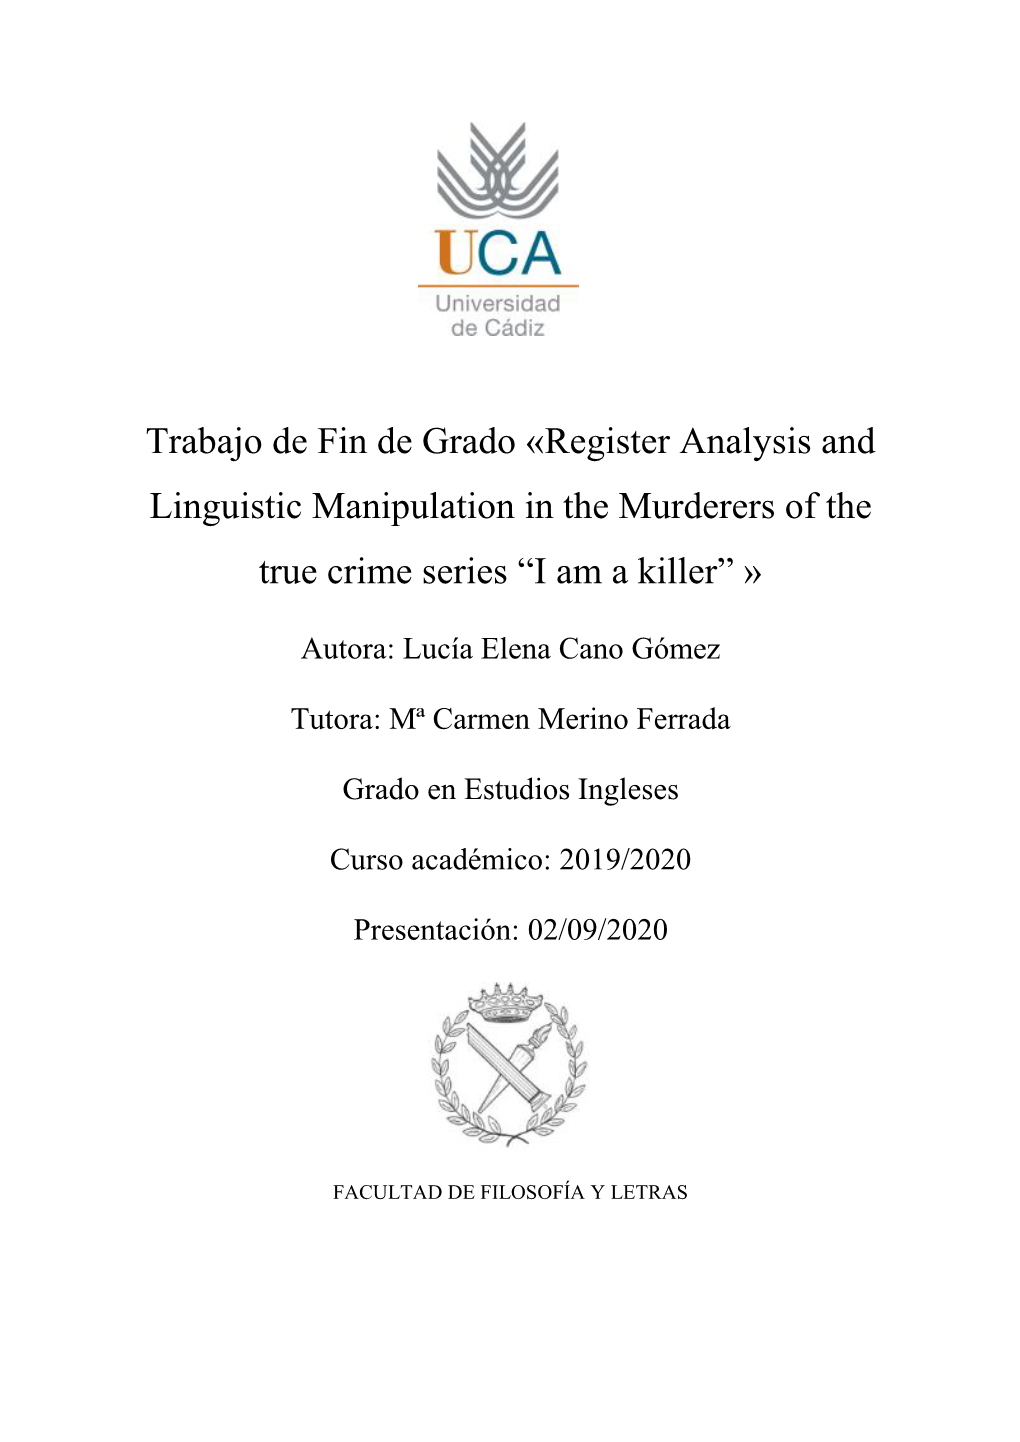 Register Analysis and Linguistic Manipulation in the Murderers of the True Crime Series ―I Am a Killer‖ »